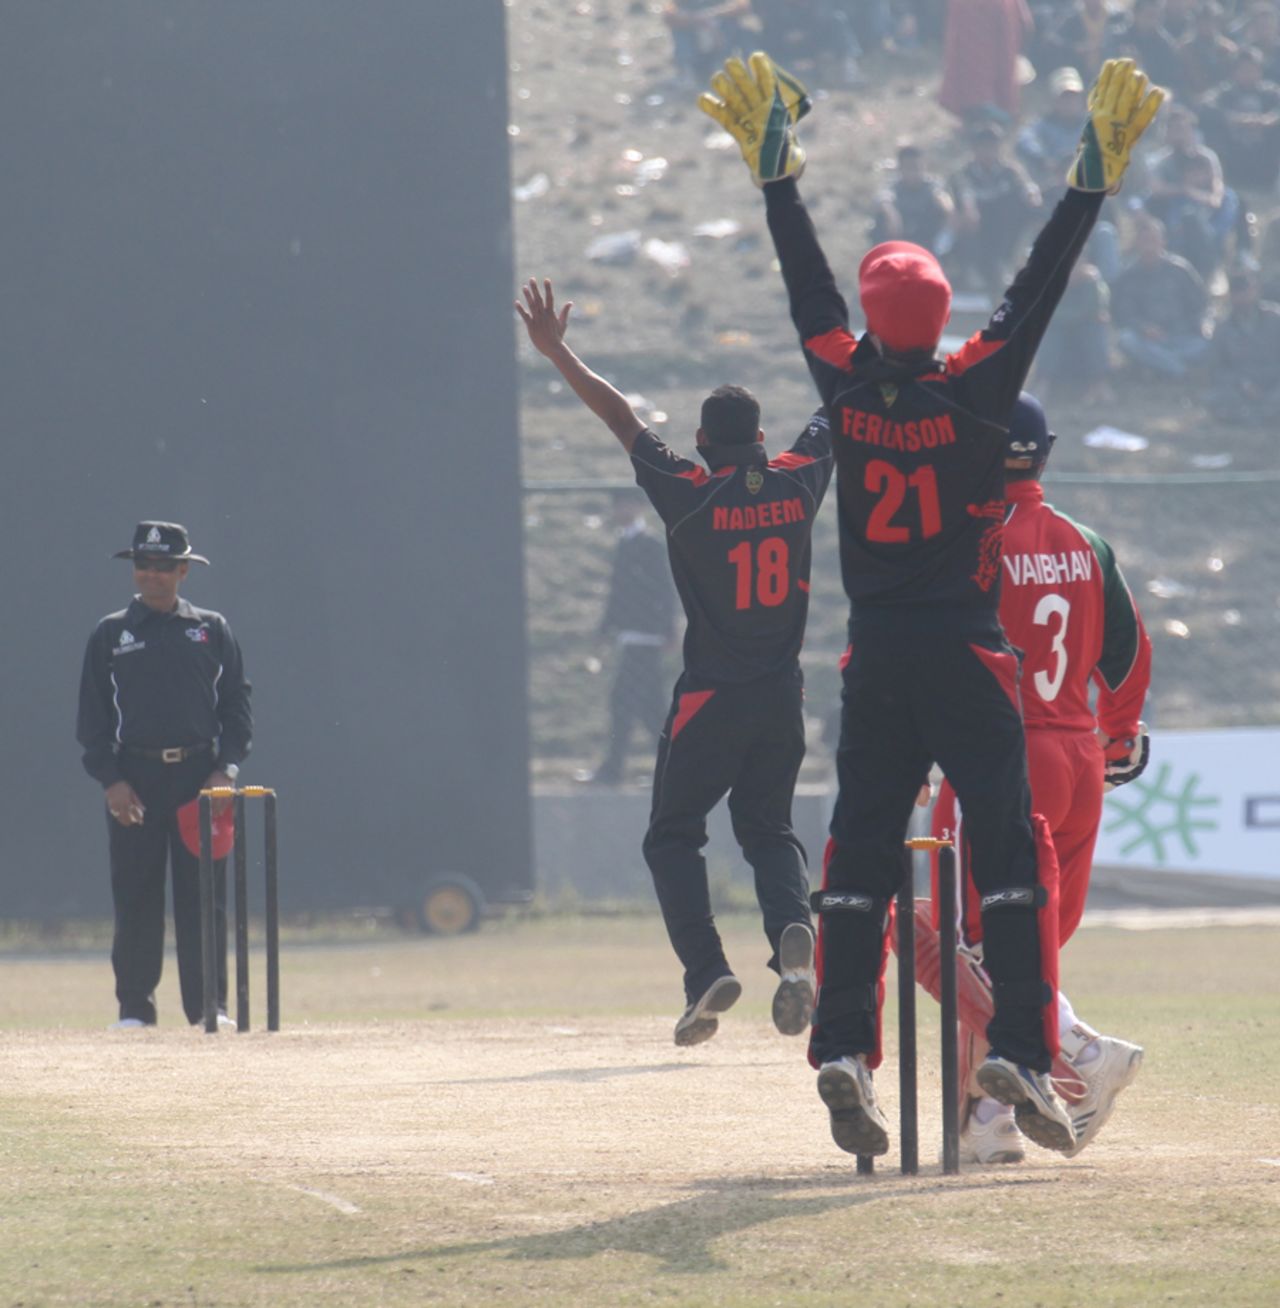 Nadeem Ahmed and Mark Ferguson appeal unsuccessfully for LBW during the ACC Twenty20 Cup 2011 semi-final against Oman in Kathmandu on 9th December 2011